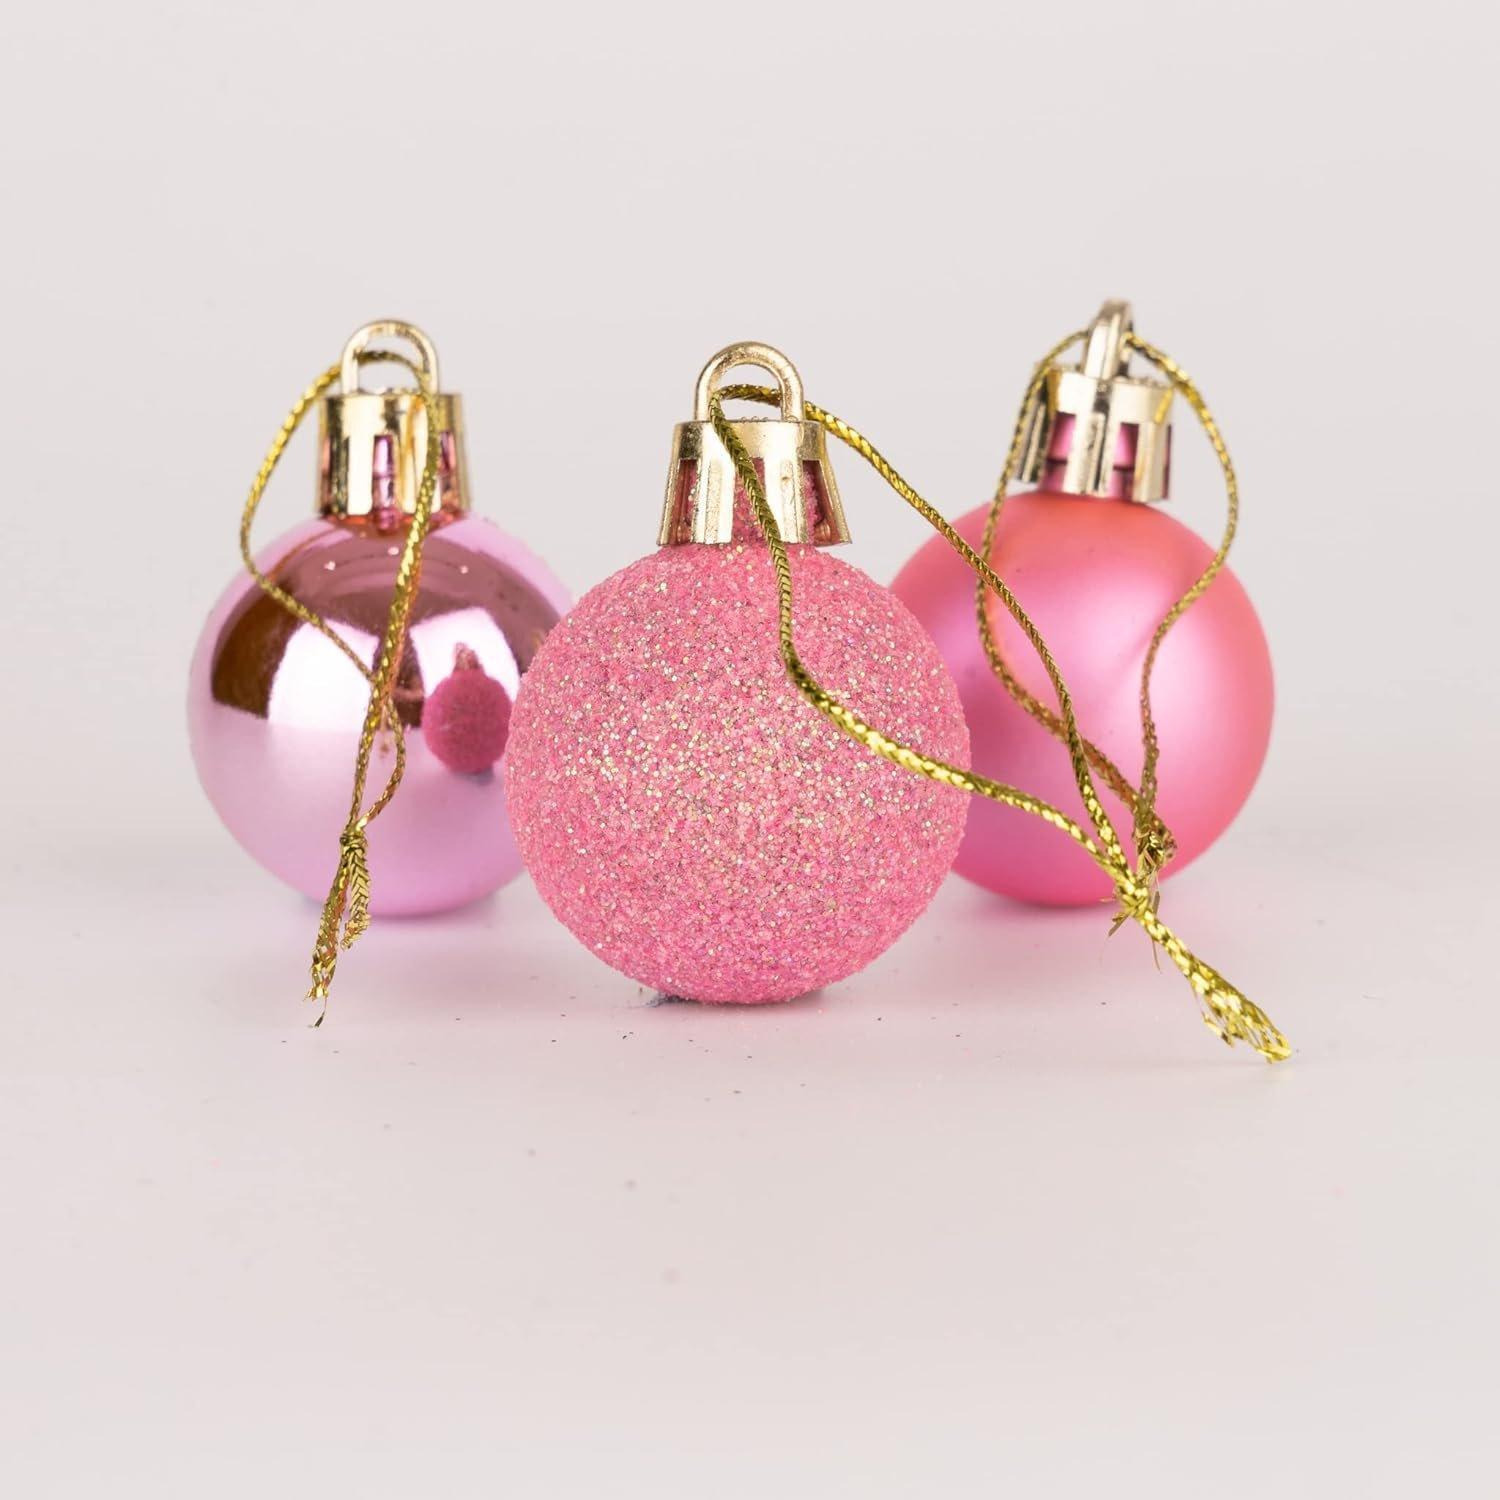 30mm/24Pcs Christmas Baubles Shatterproof Pink,Tree Decorations - image 1